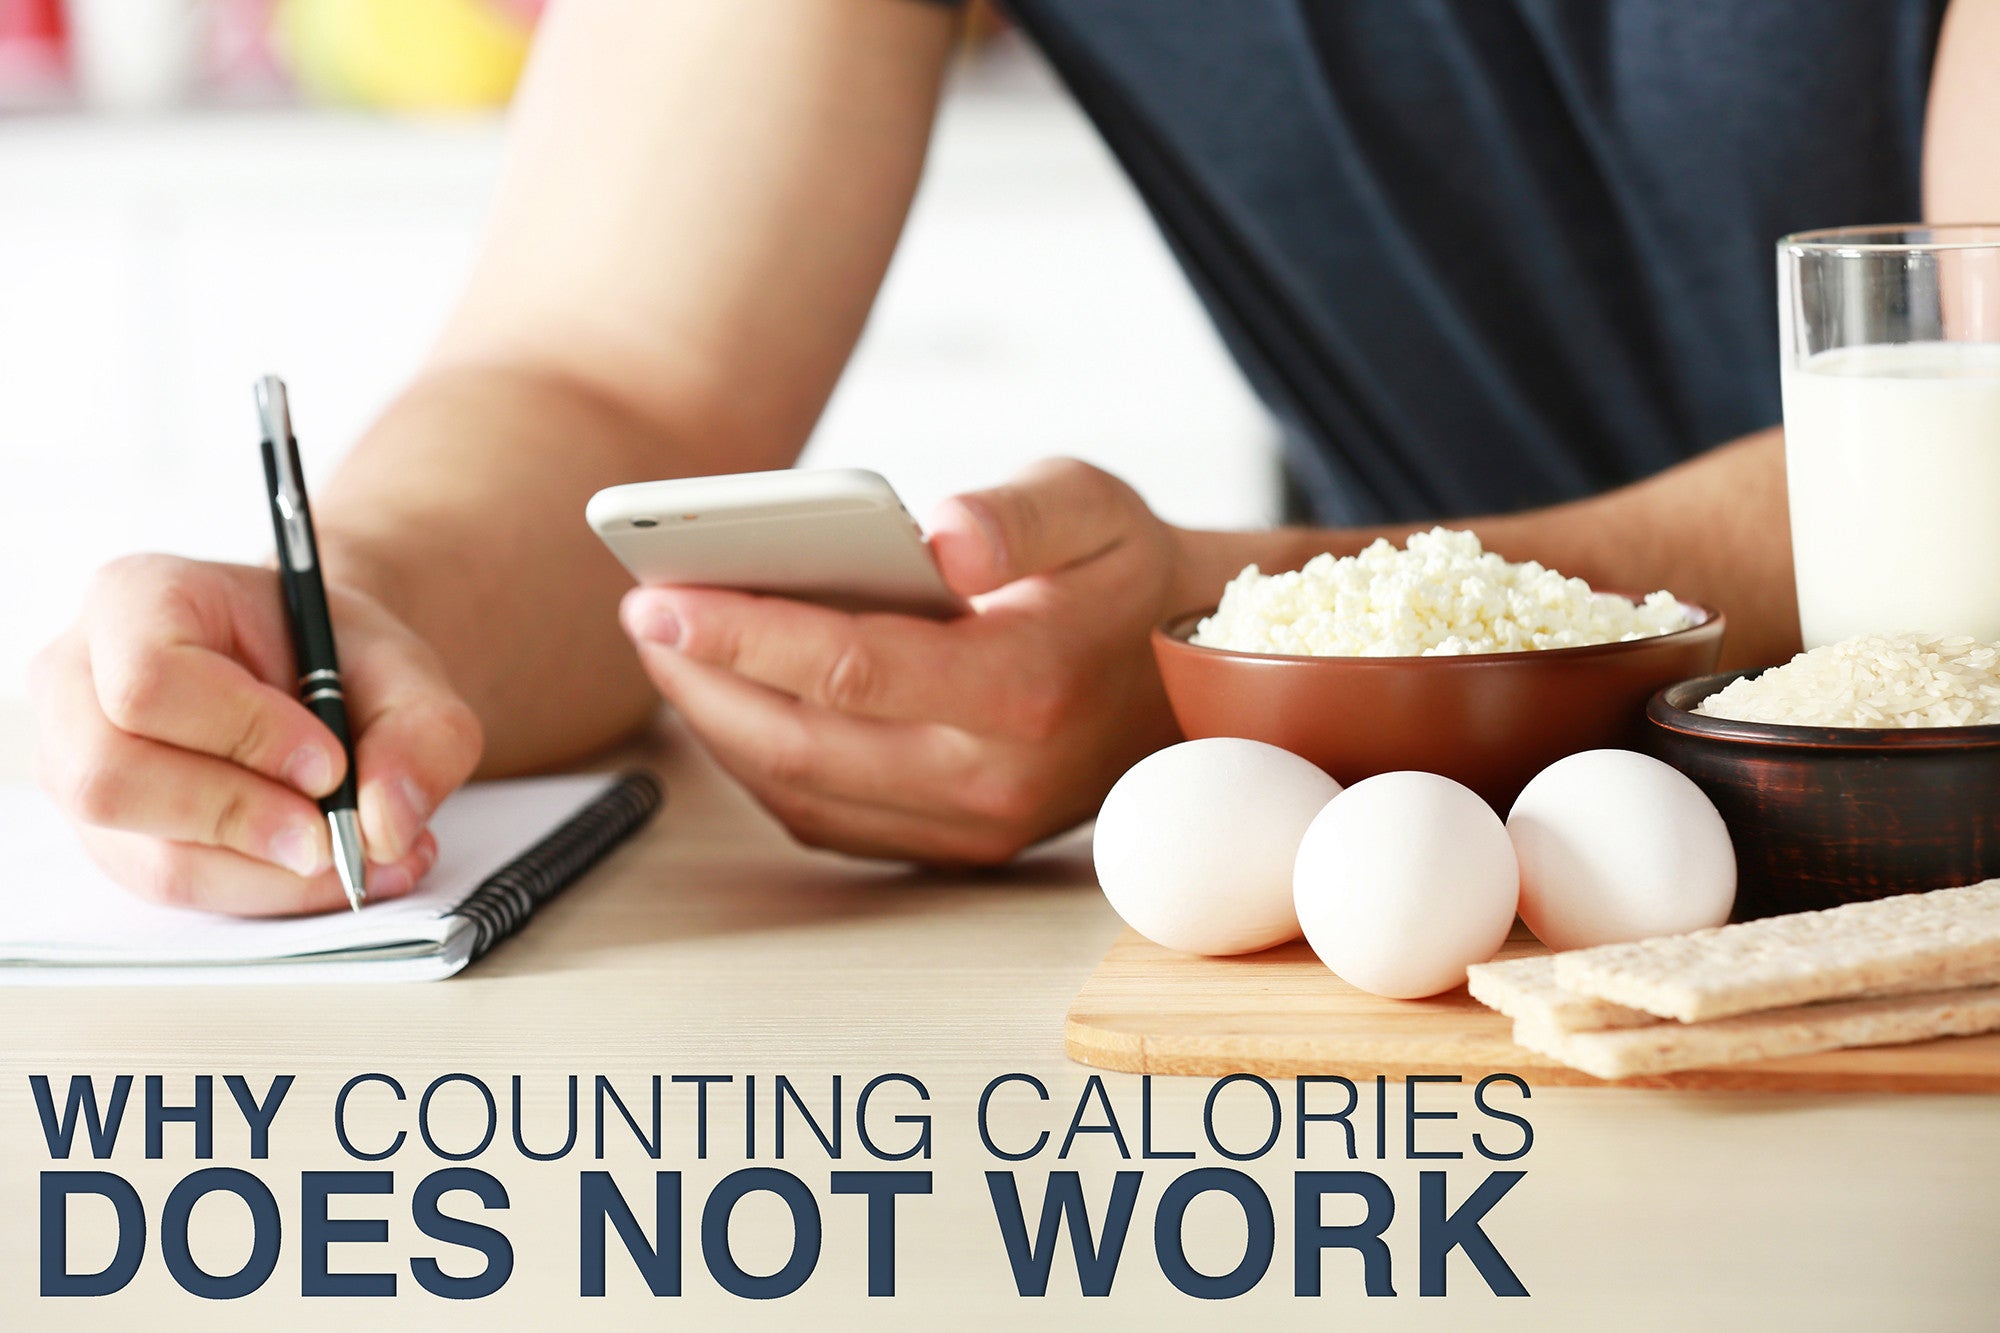 counting-calories-proven-not-to-work-lakanto